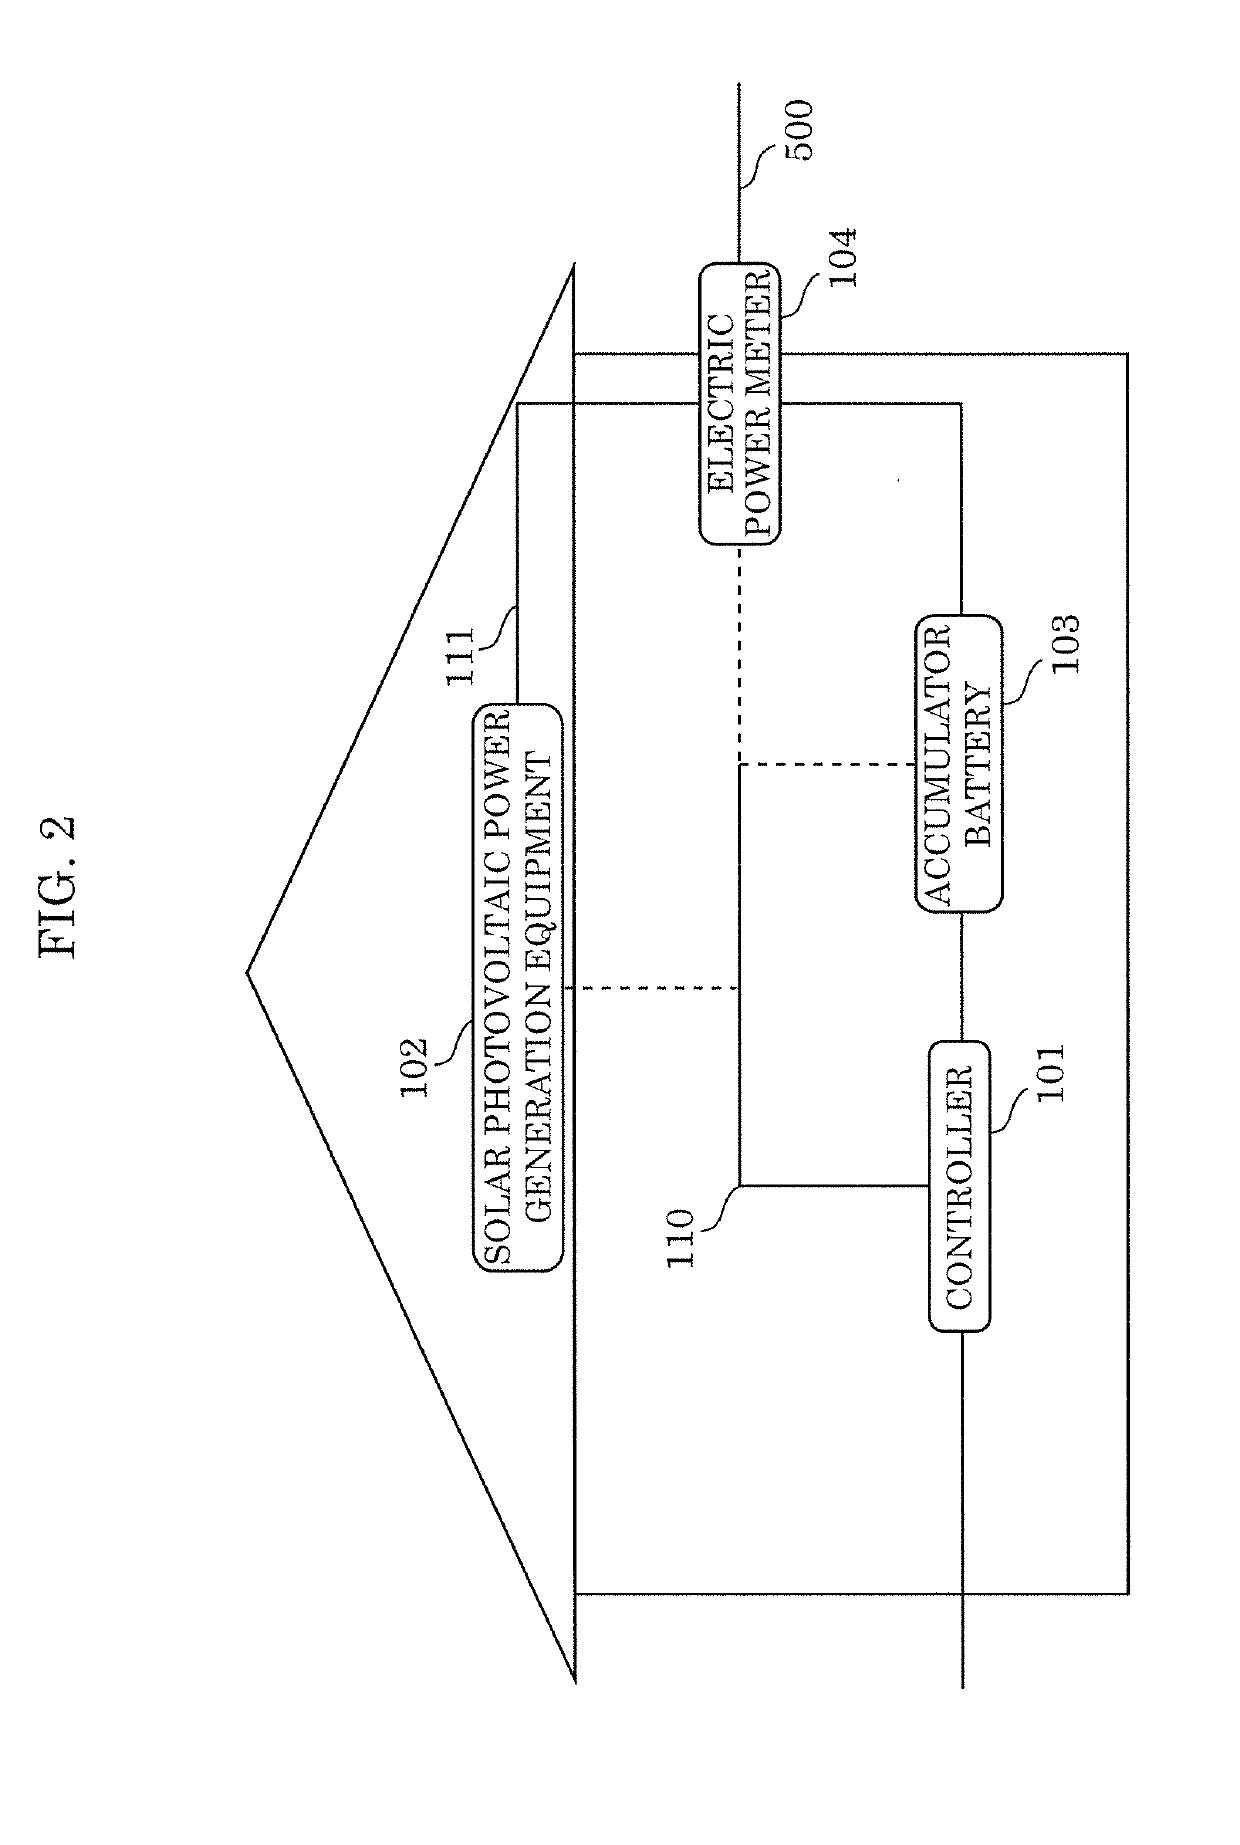 Control method, controller, data structure, and electric power transaction system